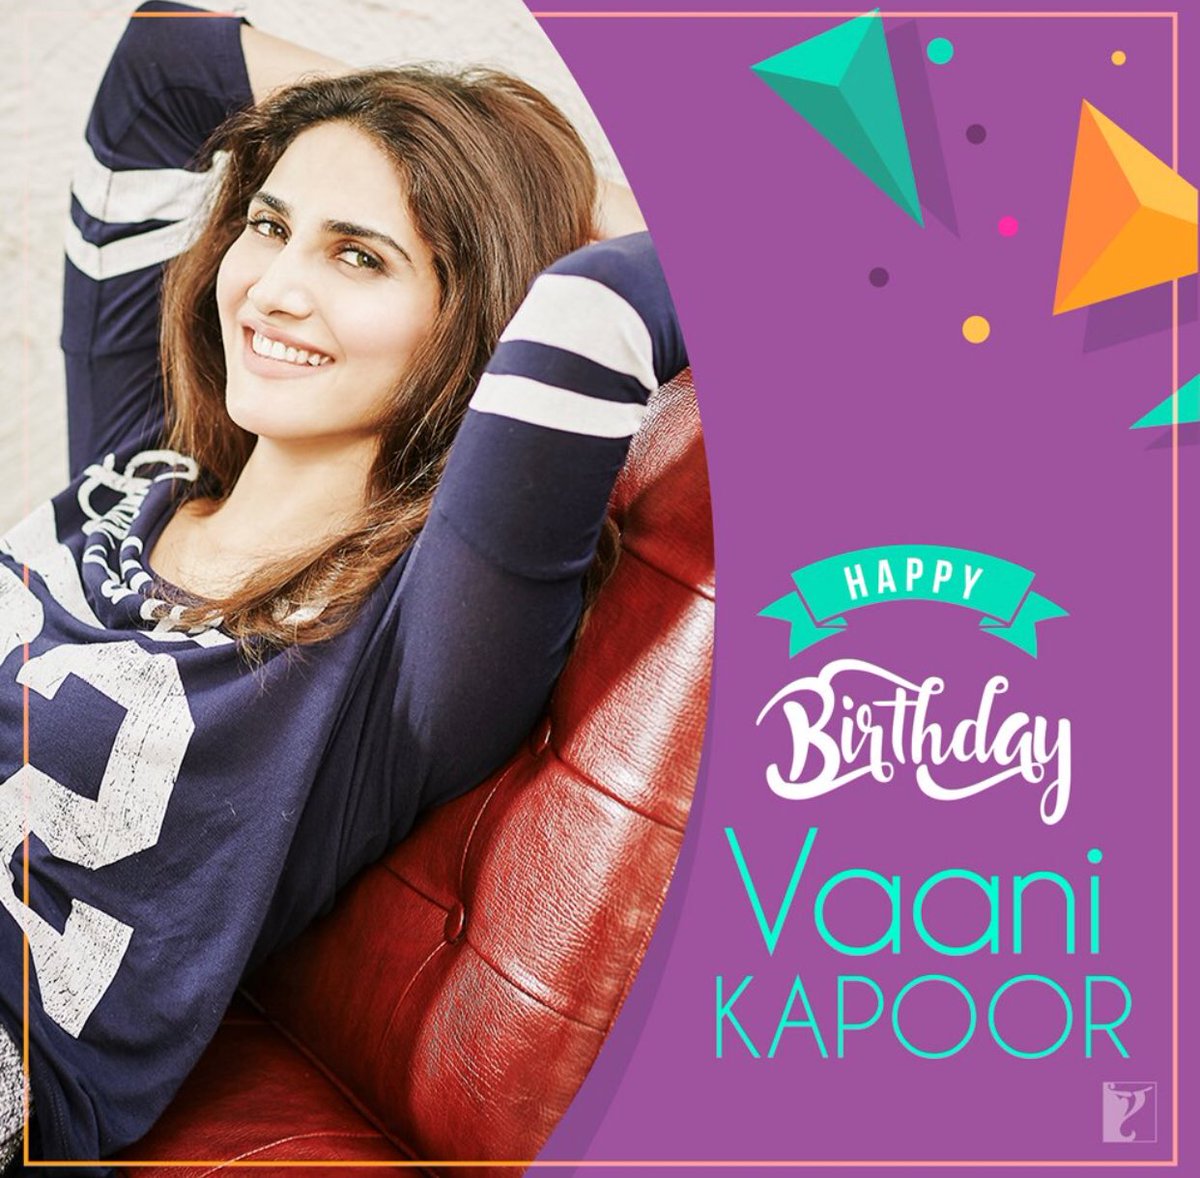 Happy Birthday Vaani Kapoor Images, HD Pictures, Ultra-HD Wallpapers ...